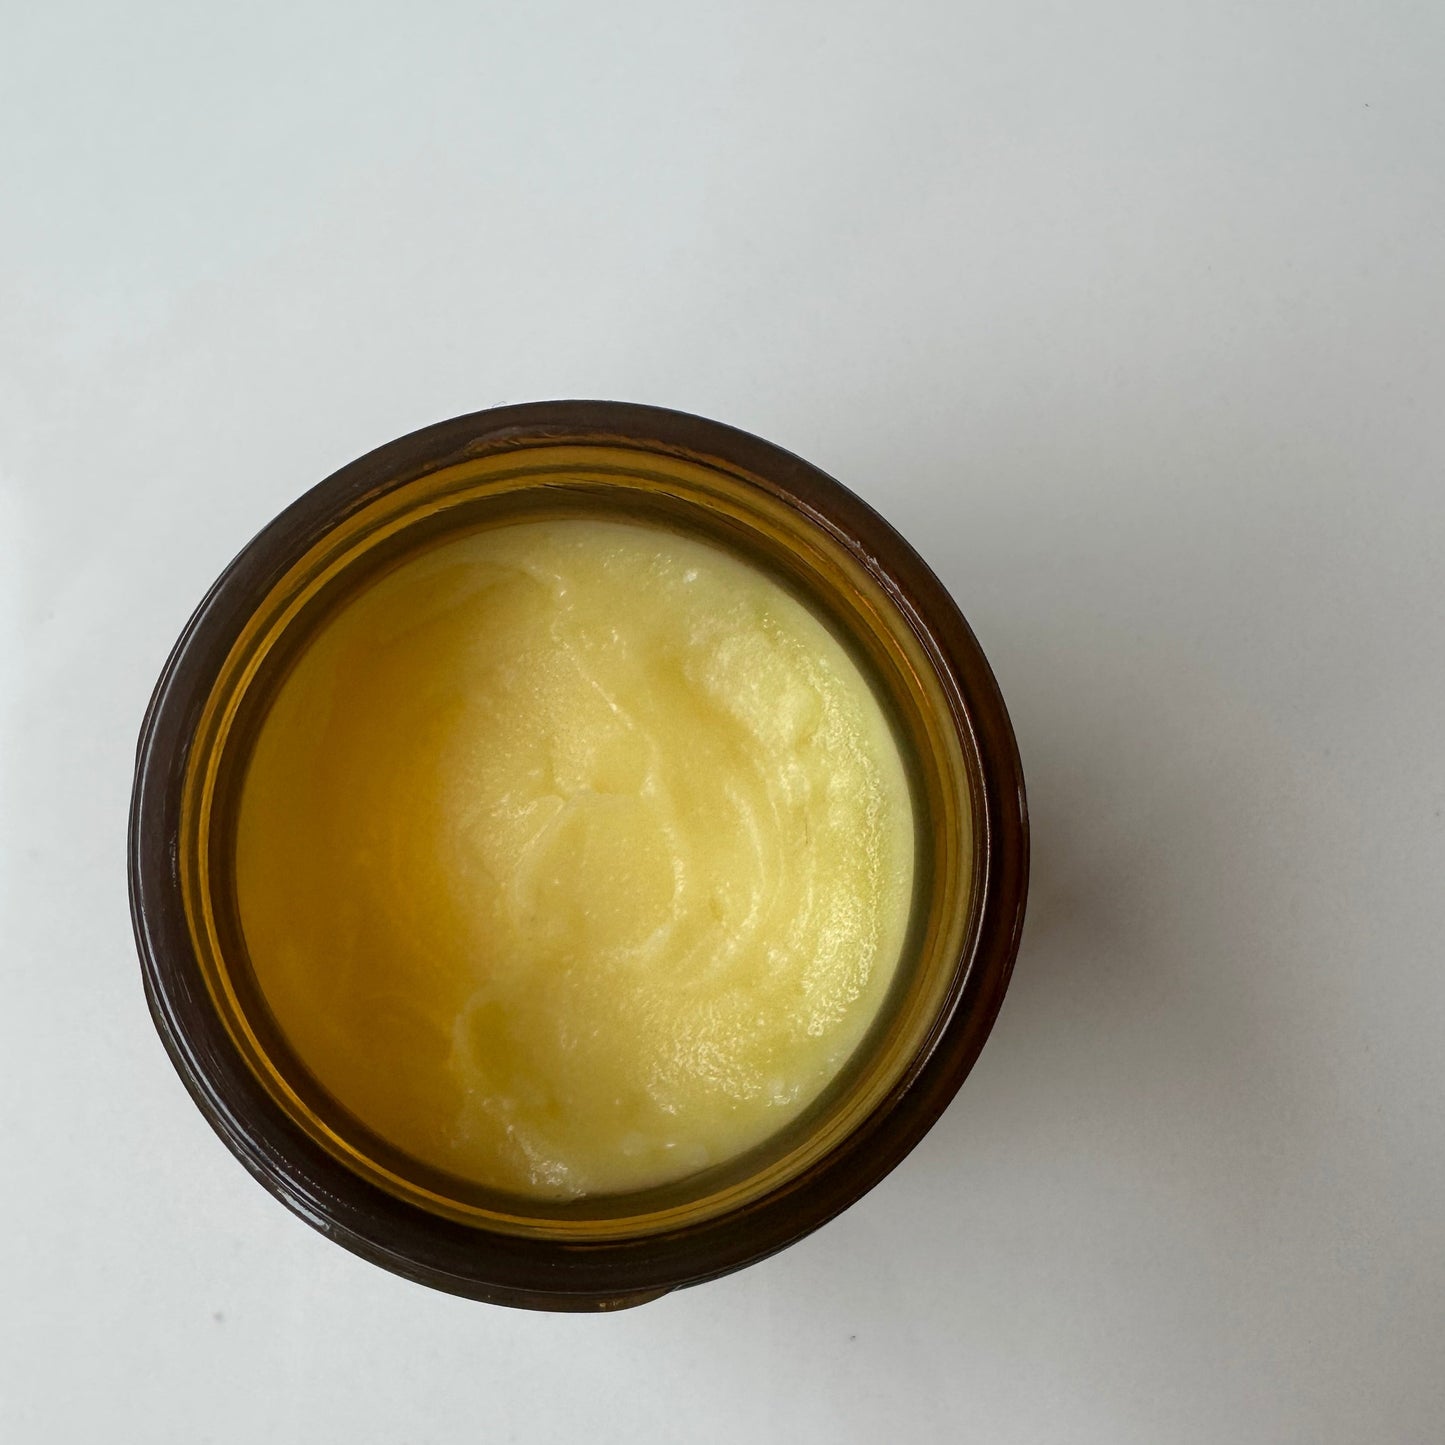 Tallow butter for cleansing skin